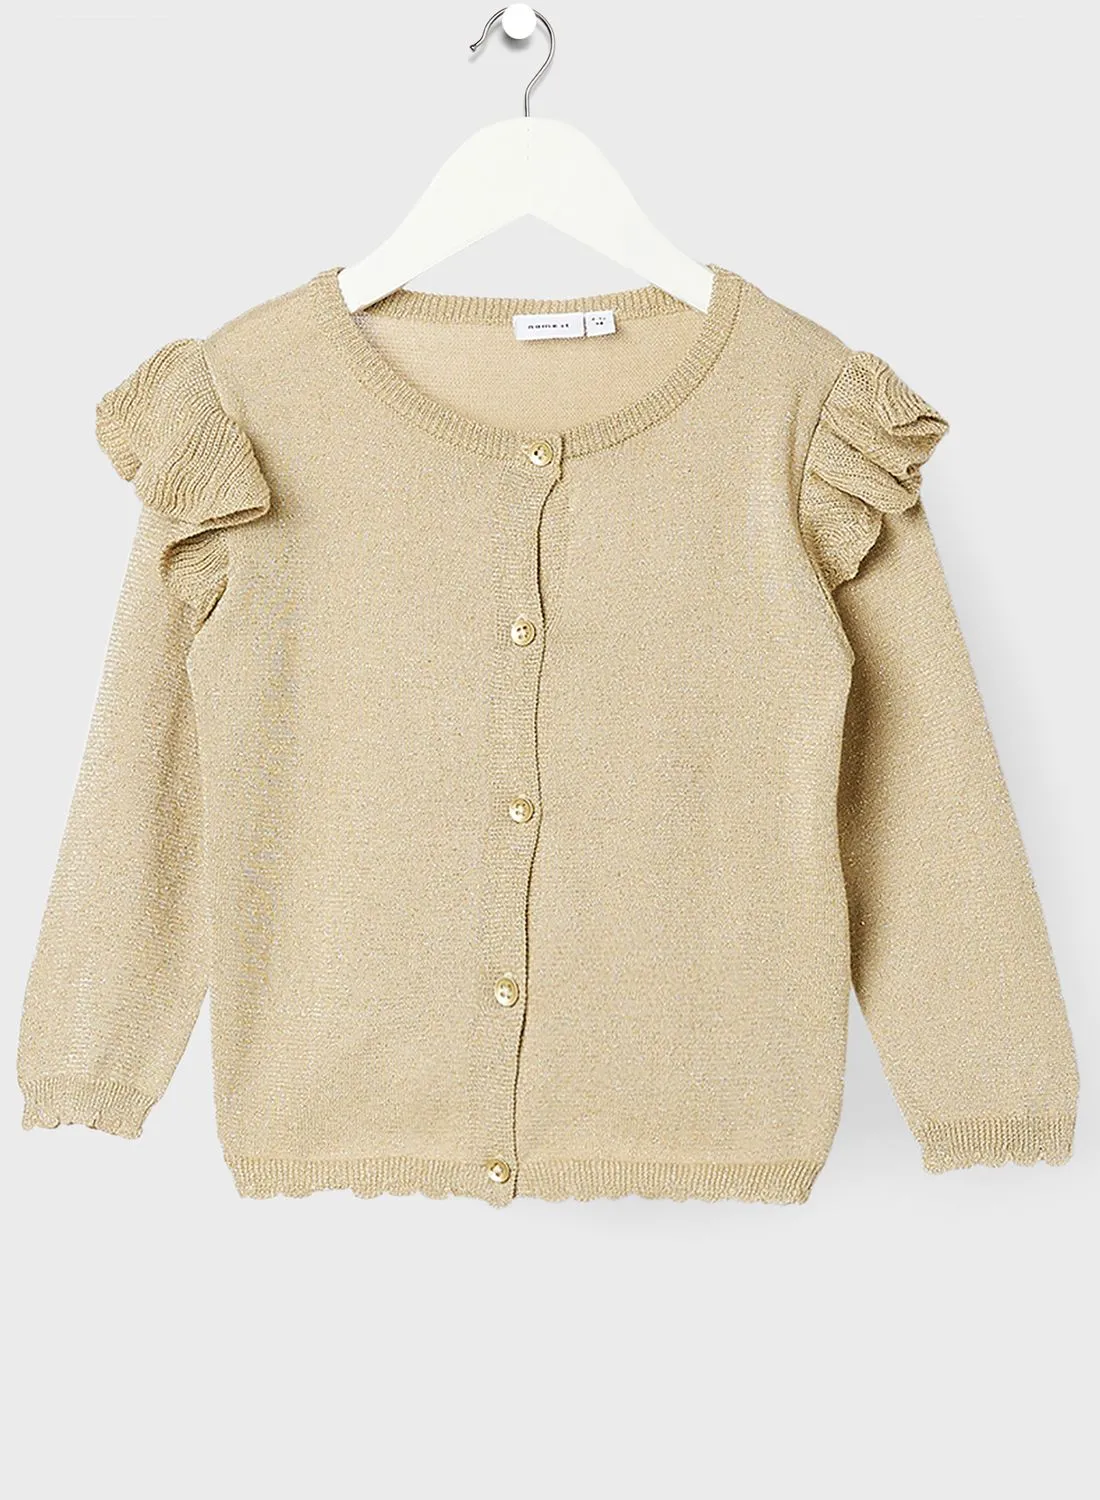 NAME IT Kids Glitter Knitted Cardigan